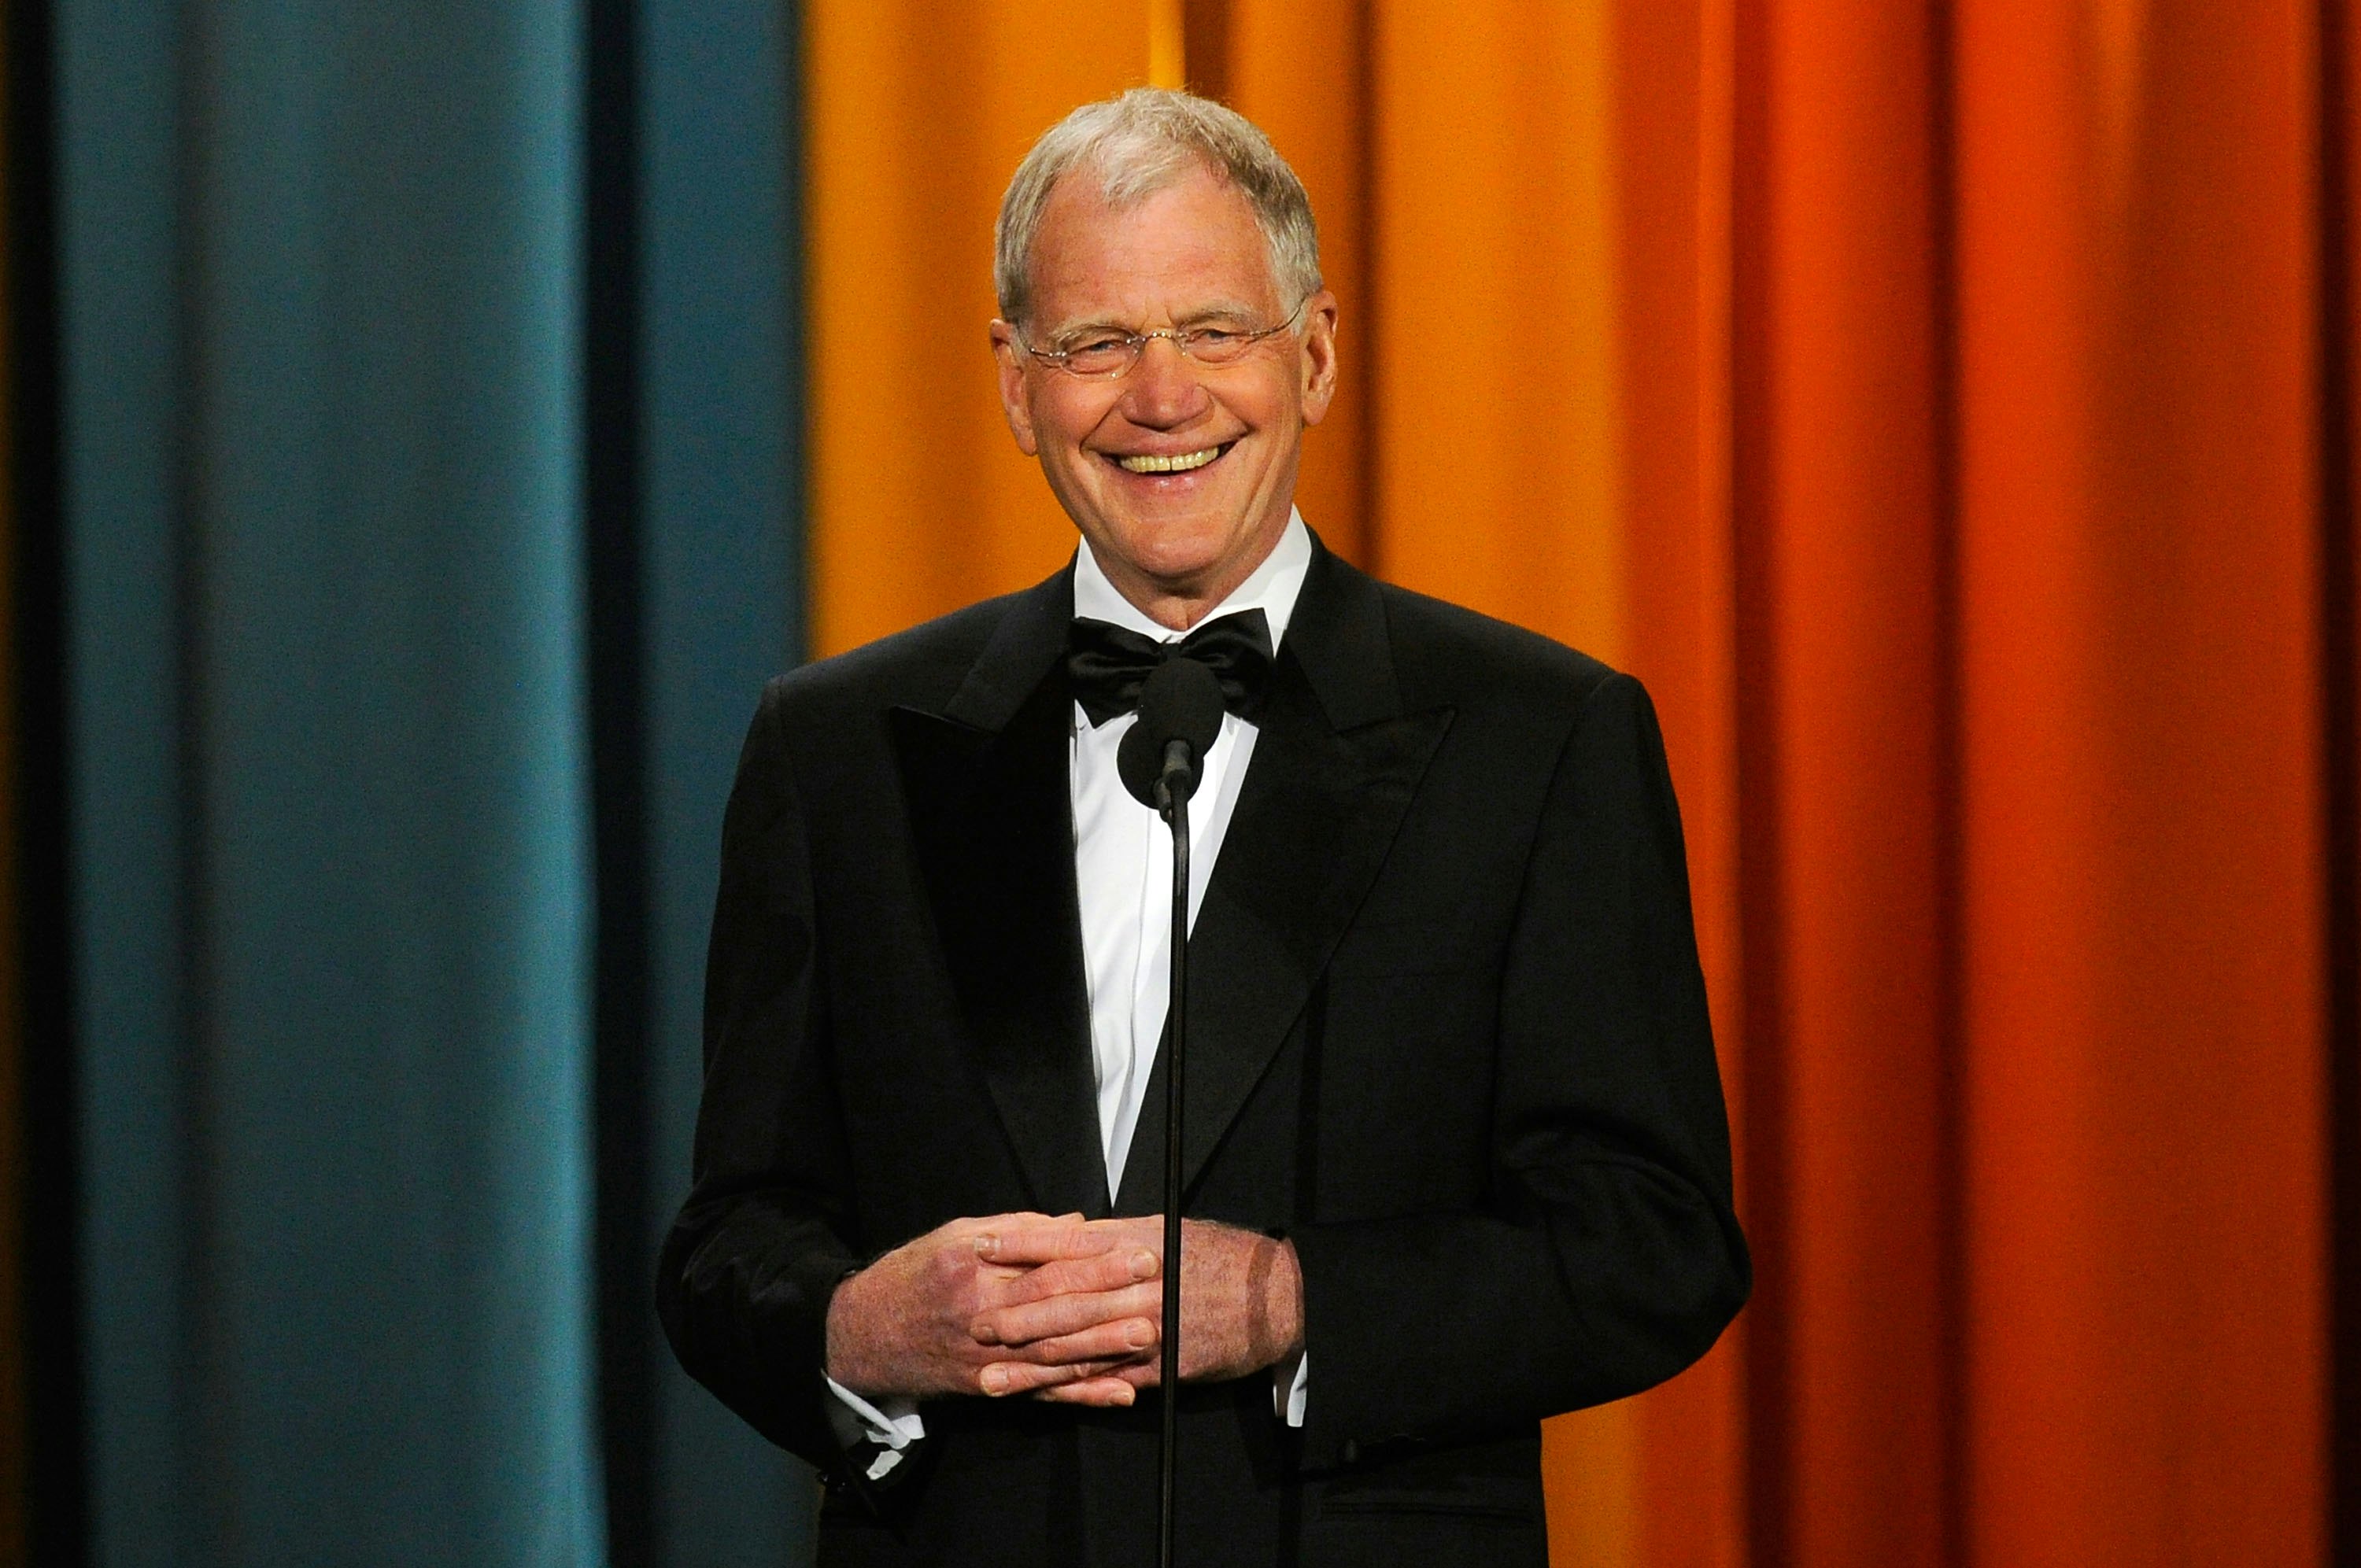 David Letterman known for his show The David Letterman Show